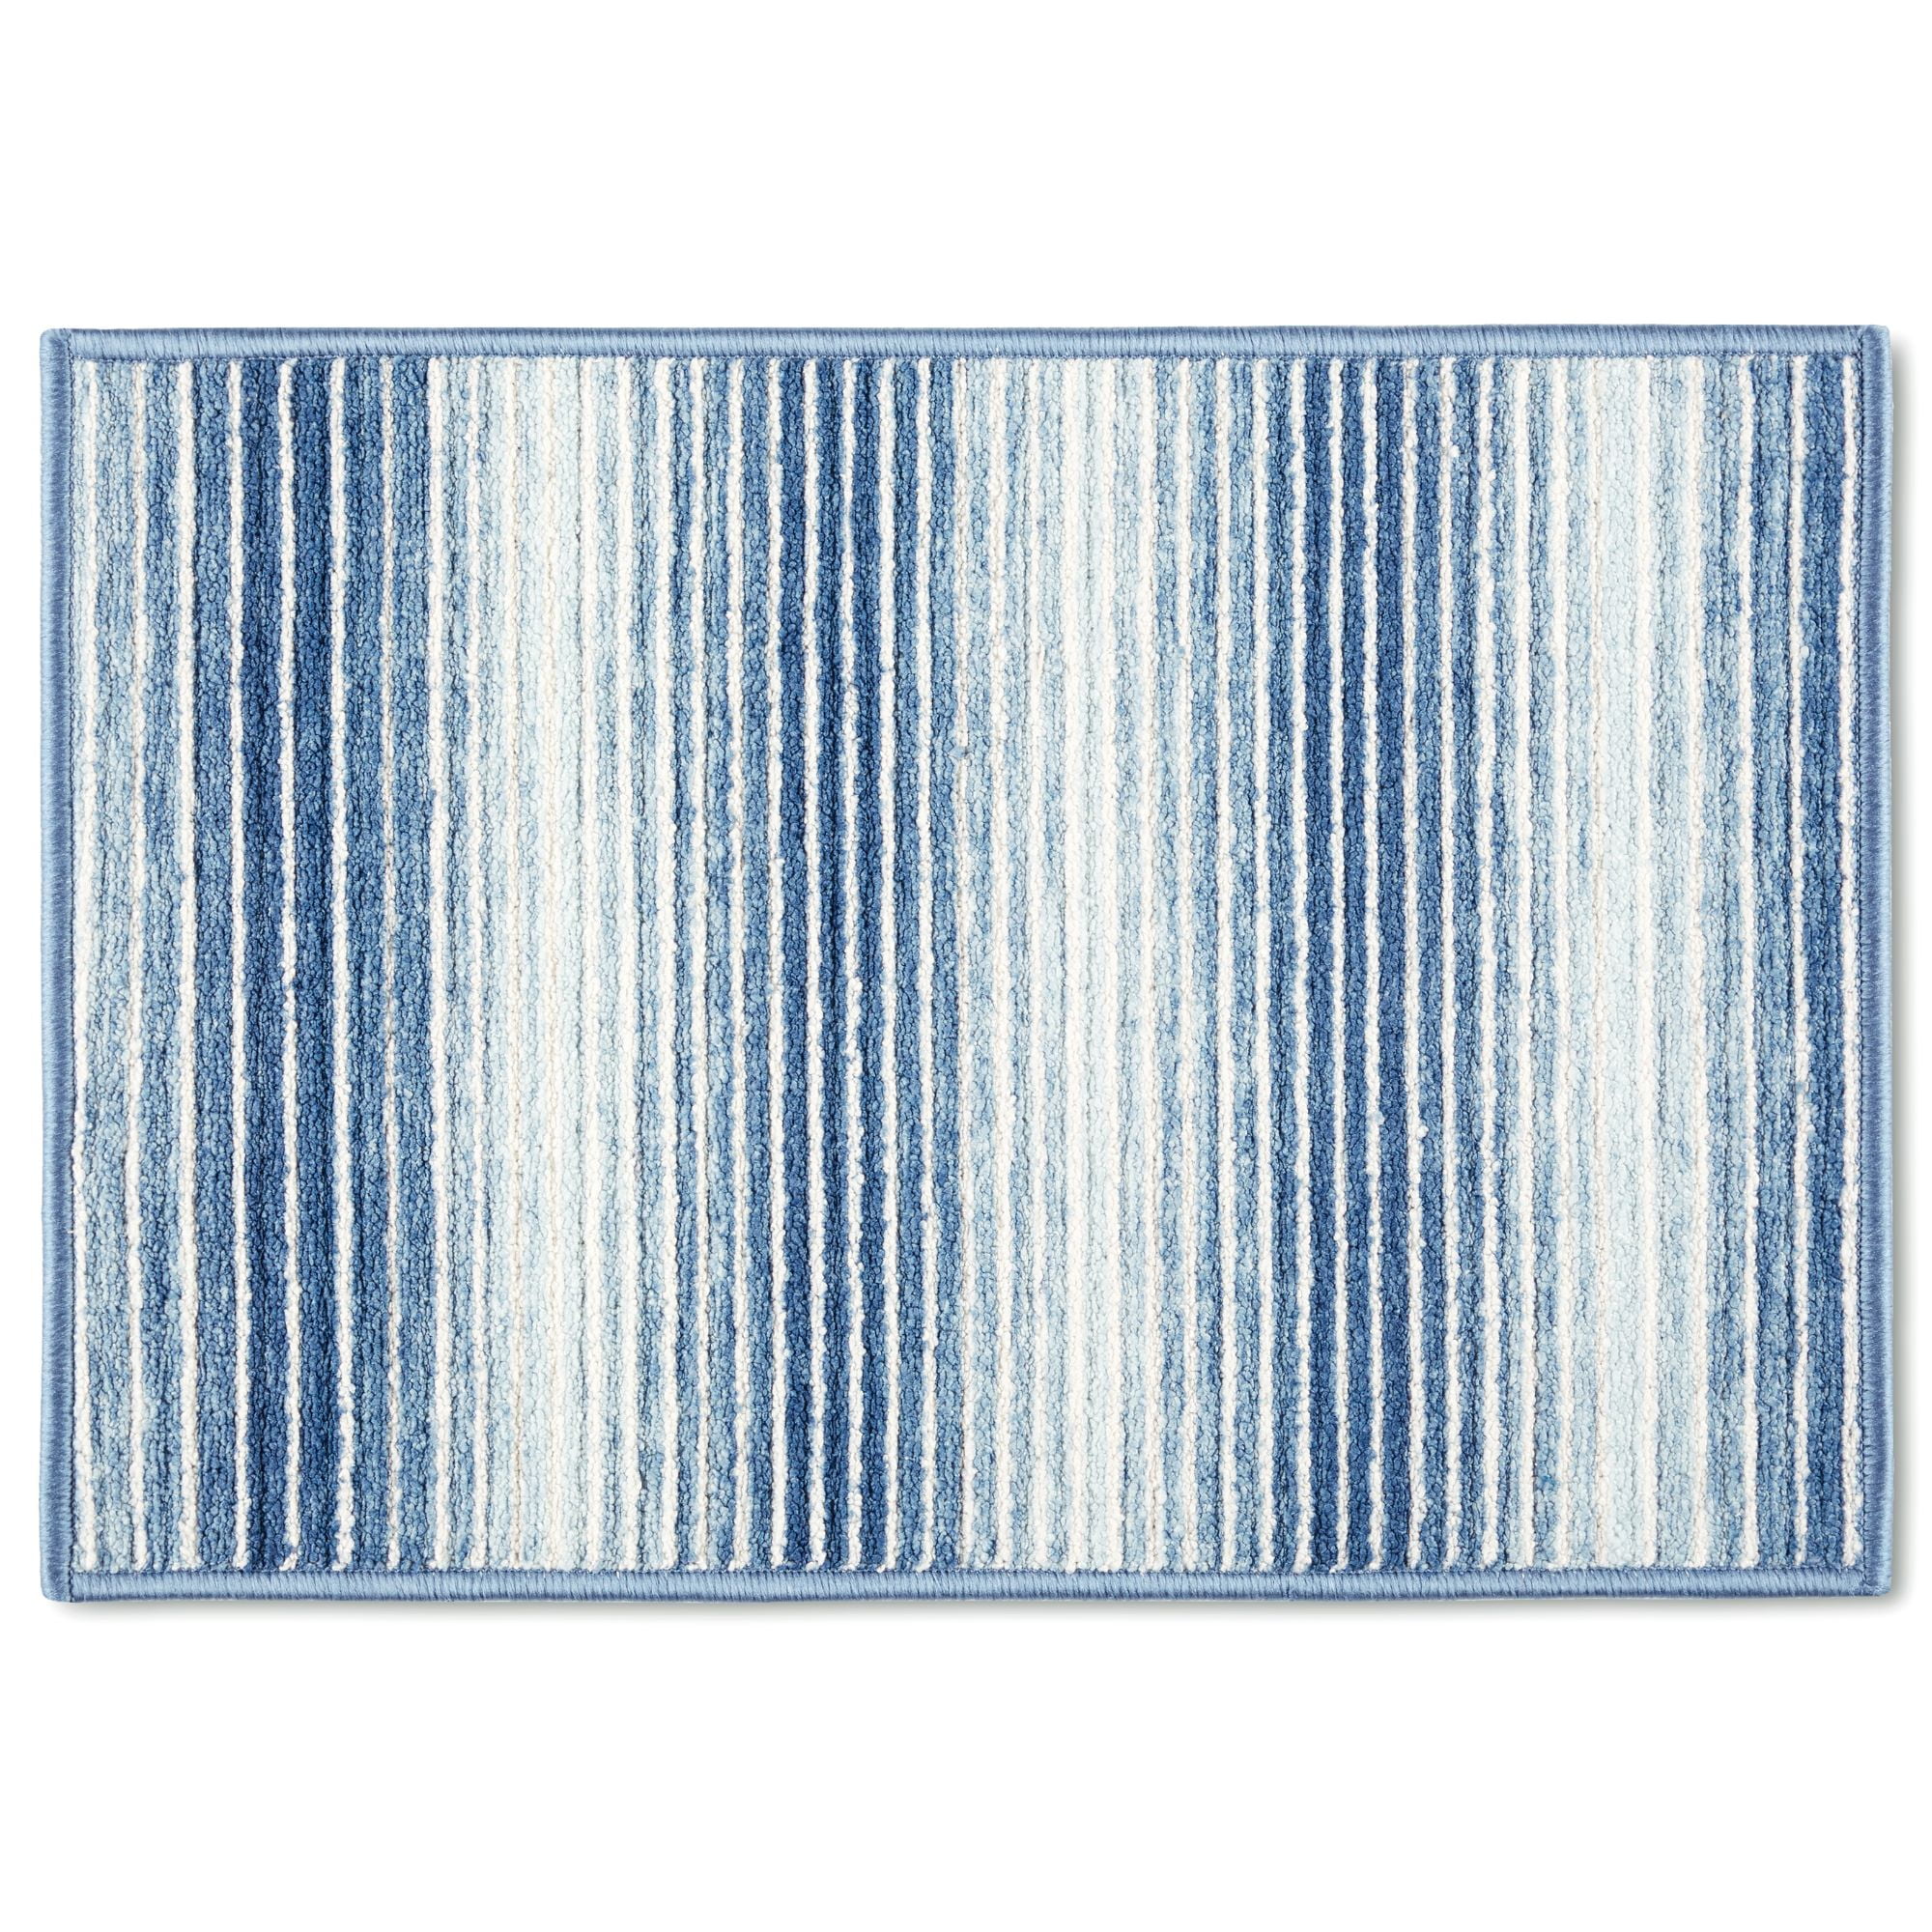 MS - MAINSTAYS Mainstays Ombre Fabric Mat, 18"x27", Blue, Available in Multiple Colors